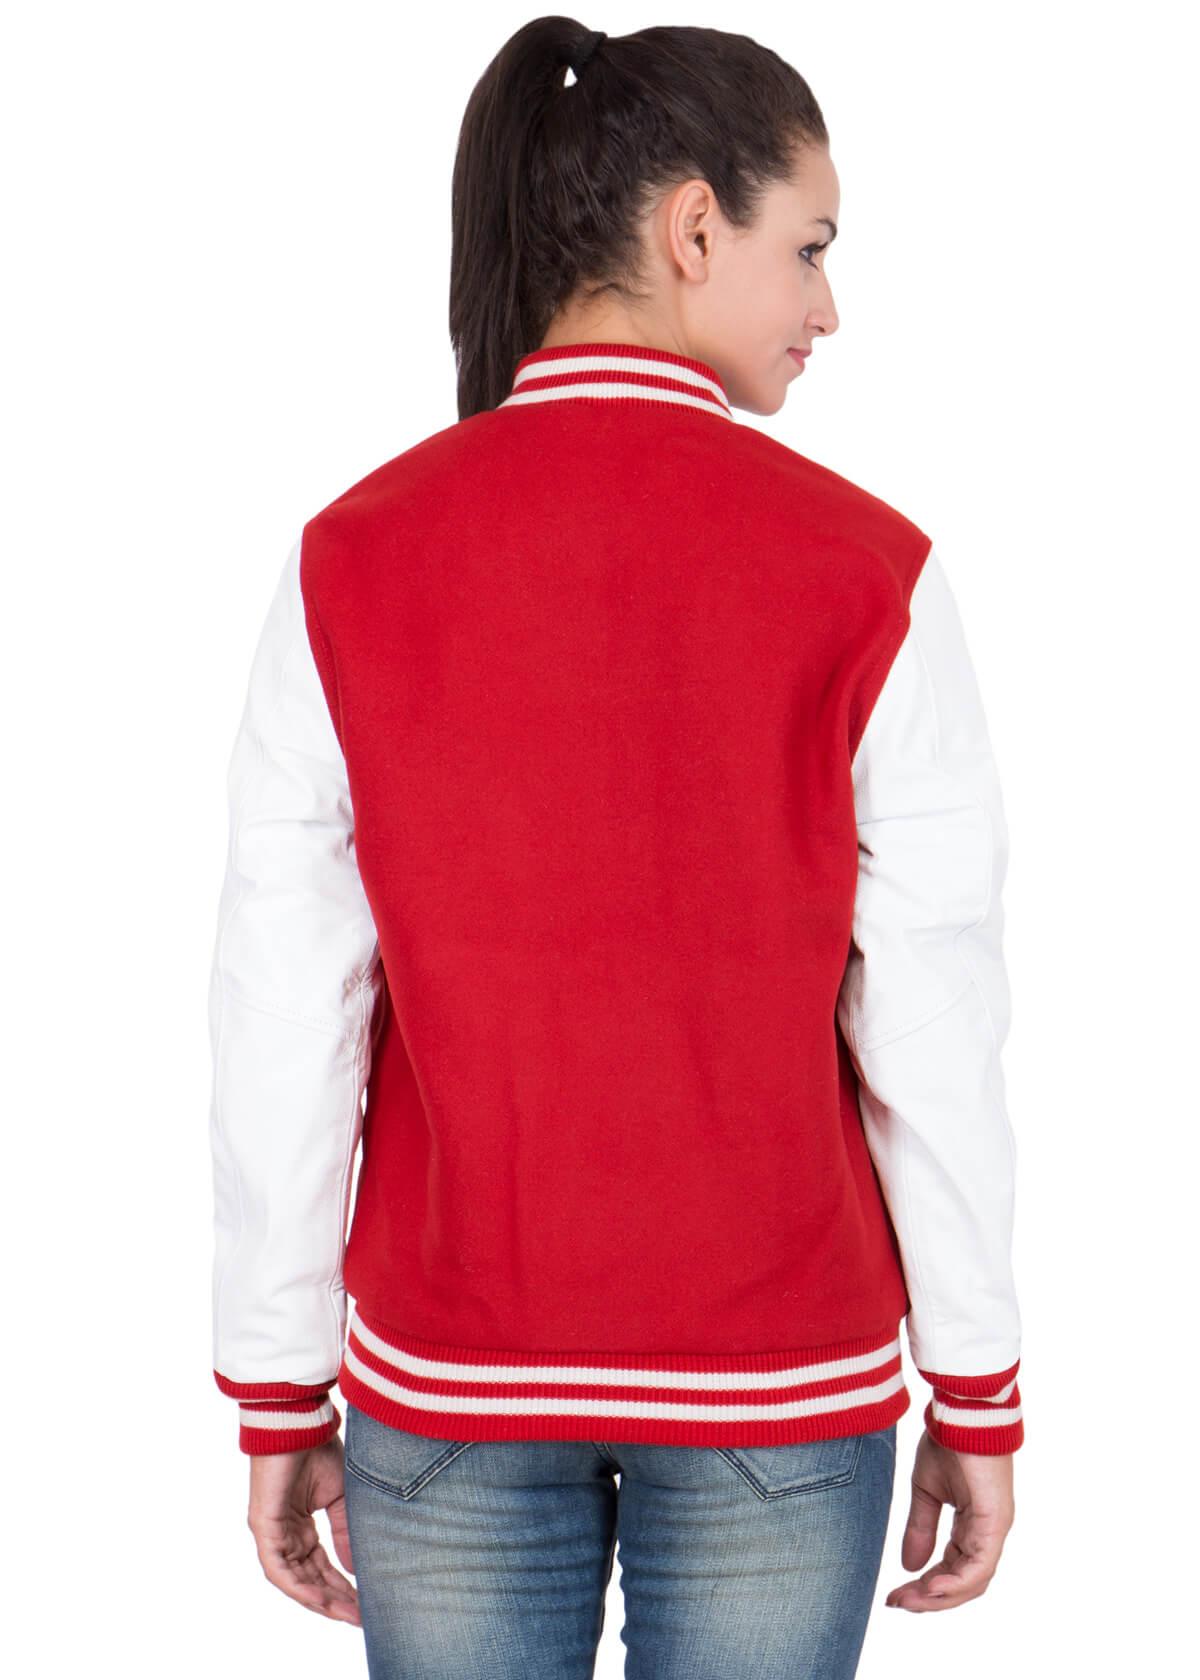 Womens Scarlet Red Varsity Jacket with White Leather Sleeves-7